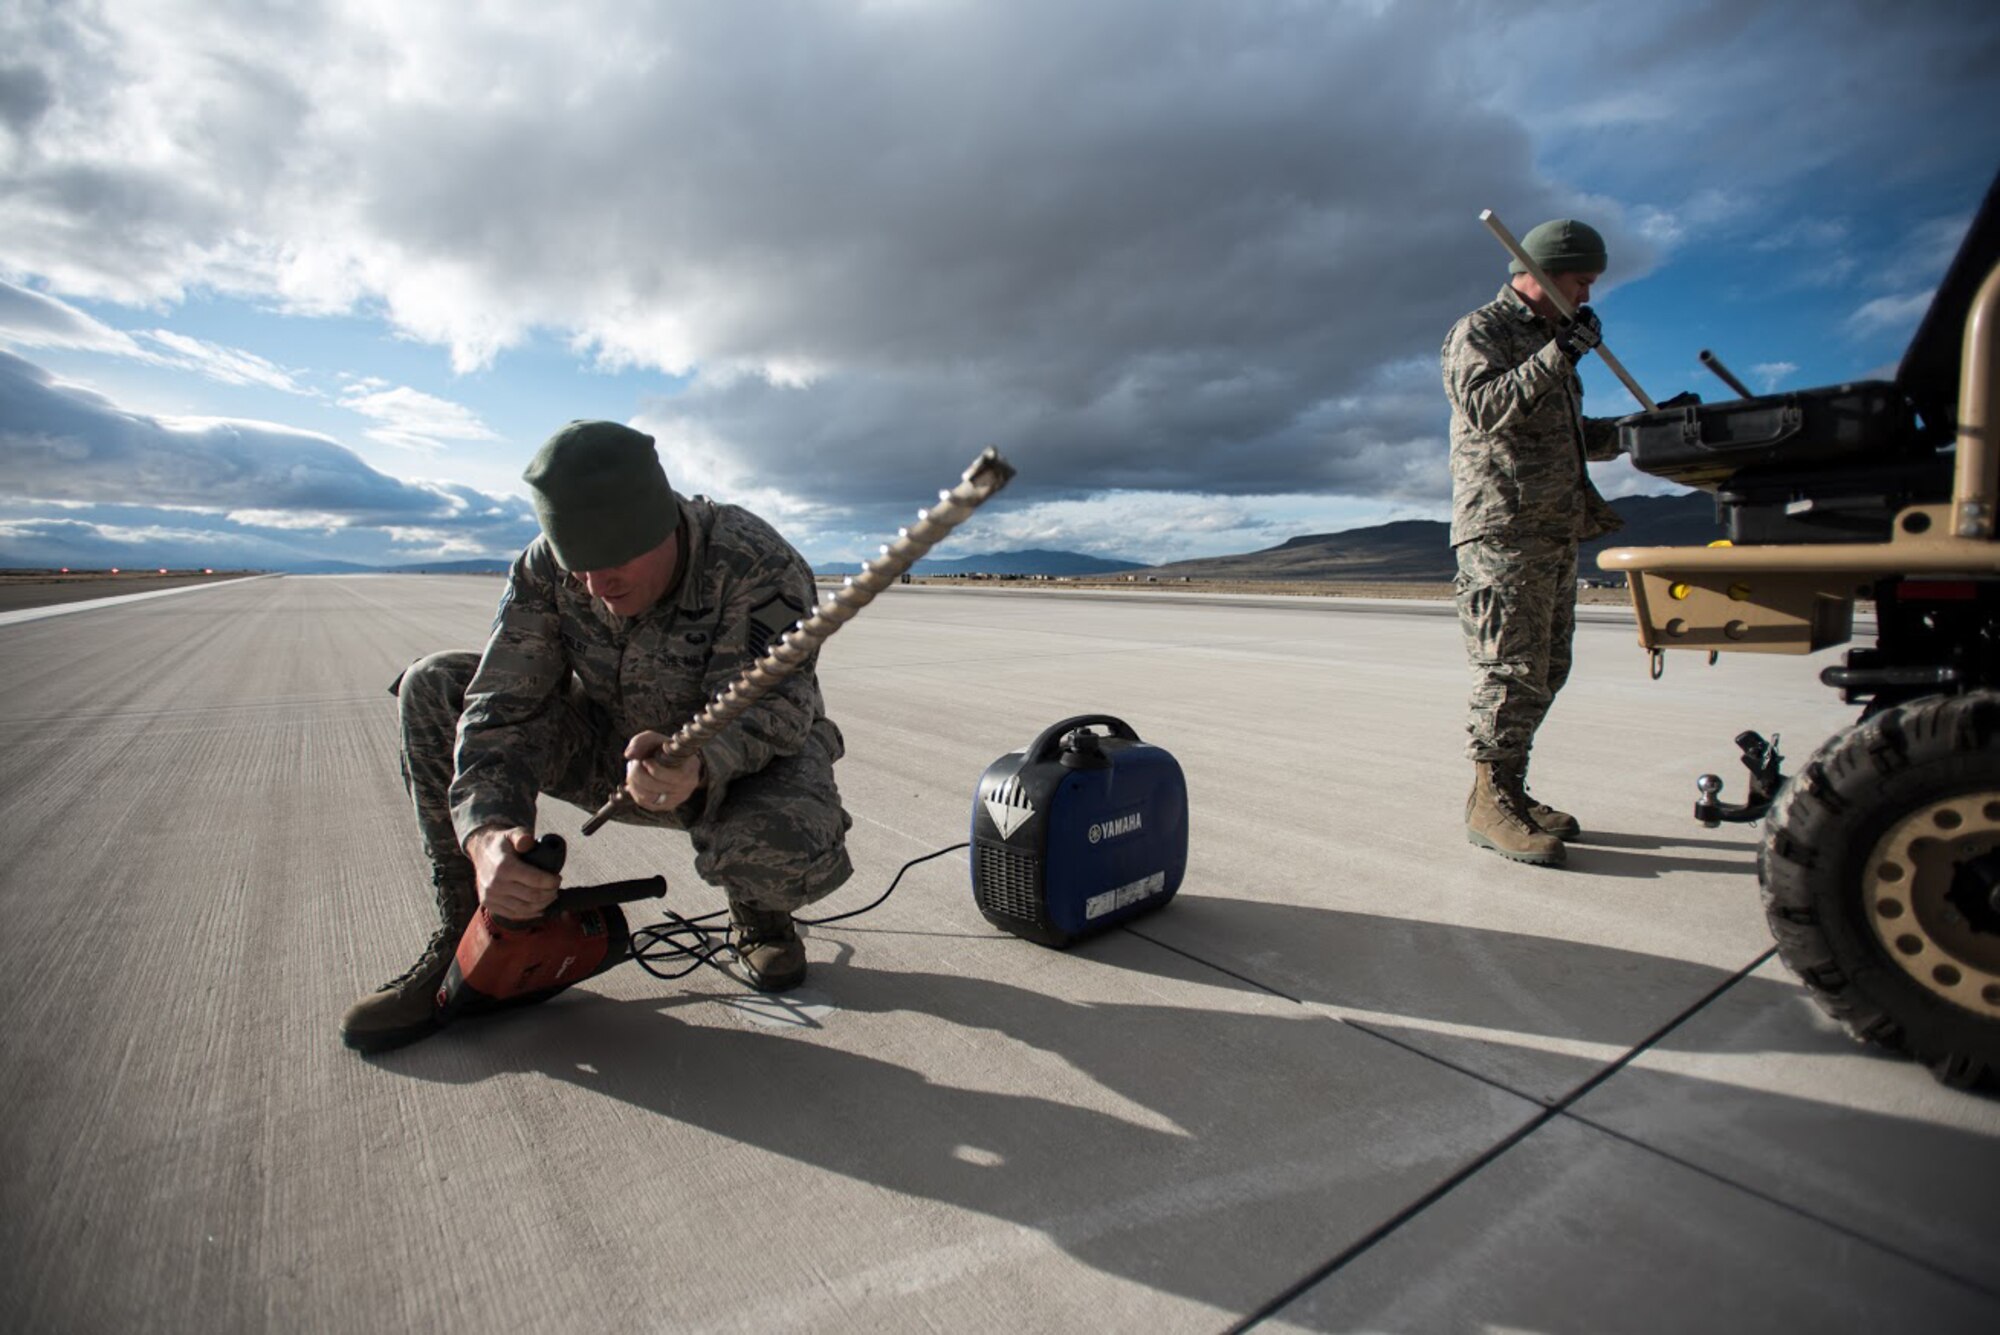 U.S. Air Force Master Sgt. Joshua Selby, ramp coordinator with the Kentucky Air National Guard’s 123rd Contingency Response Group, prepares to drill into the runway at Amedee Army Airfield, Calif., to get a core sample to test the strength of the concrete on March 6, 2016. The 123rd CRG is working in conjunction with the U.S. Army’s 688th Rapid Port Opening Element and a team from the Defense Logistics Agency to operate Joint Task Force-Port Opening Sangala during a week-long exercise called Operation Lumberjack. The objective of the JTF-PO is to establish an aerial port of debarkation, provide initial distribution capability and set up warehousing for distribution beyond a forward node. (Kentucky Air National Guard photo by Master Sgt. Phil Speck)